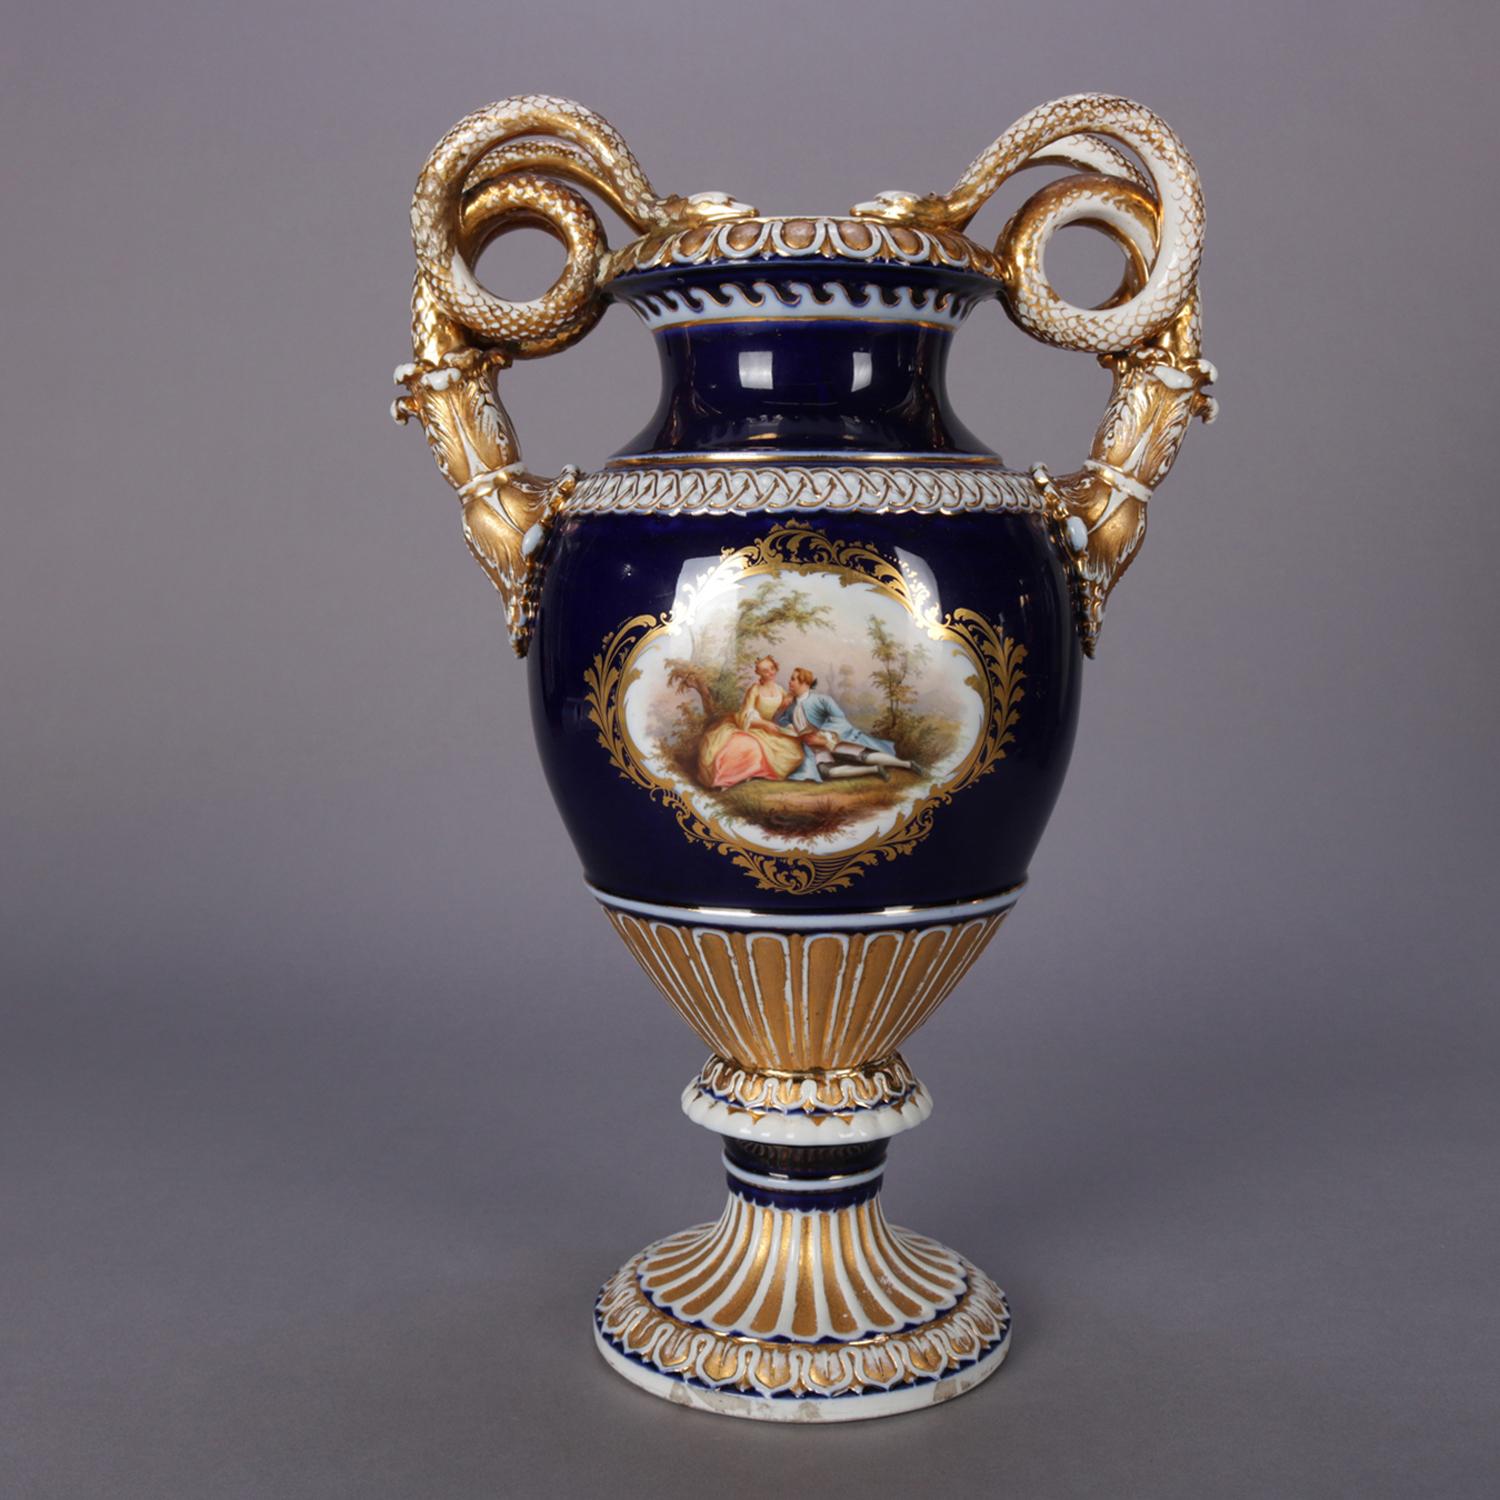 An antique and large French Sèvres Porcelain open urn featuring hand painted reserve with courting scene, double figural and gilt serpent handles, raised on reeded and gilt pedestal base, double crossed sword mark on base, circa 1880.

Measures: